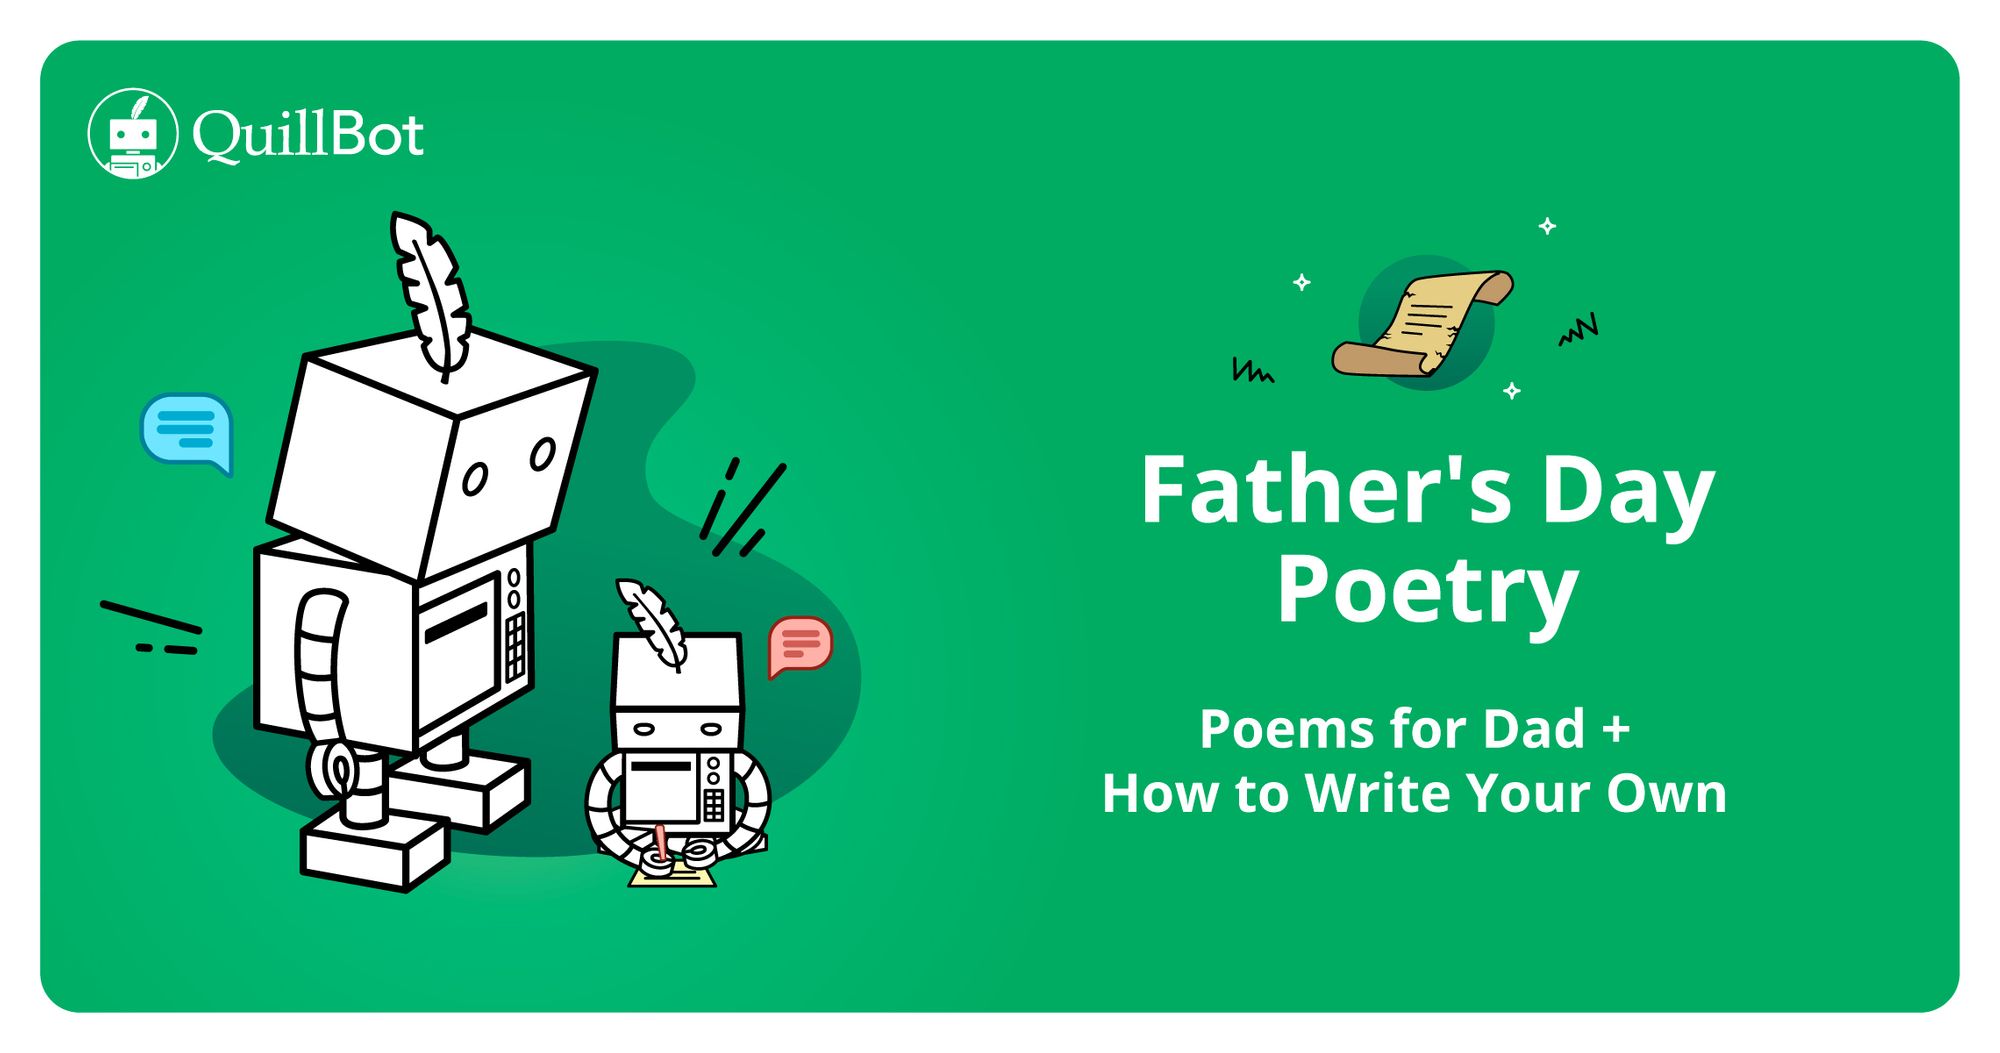 Father's Day Poem 2021 - How to Write Your Own